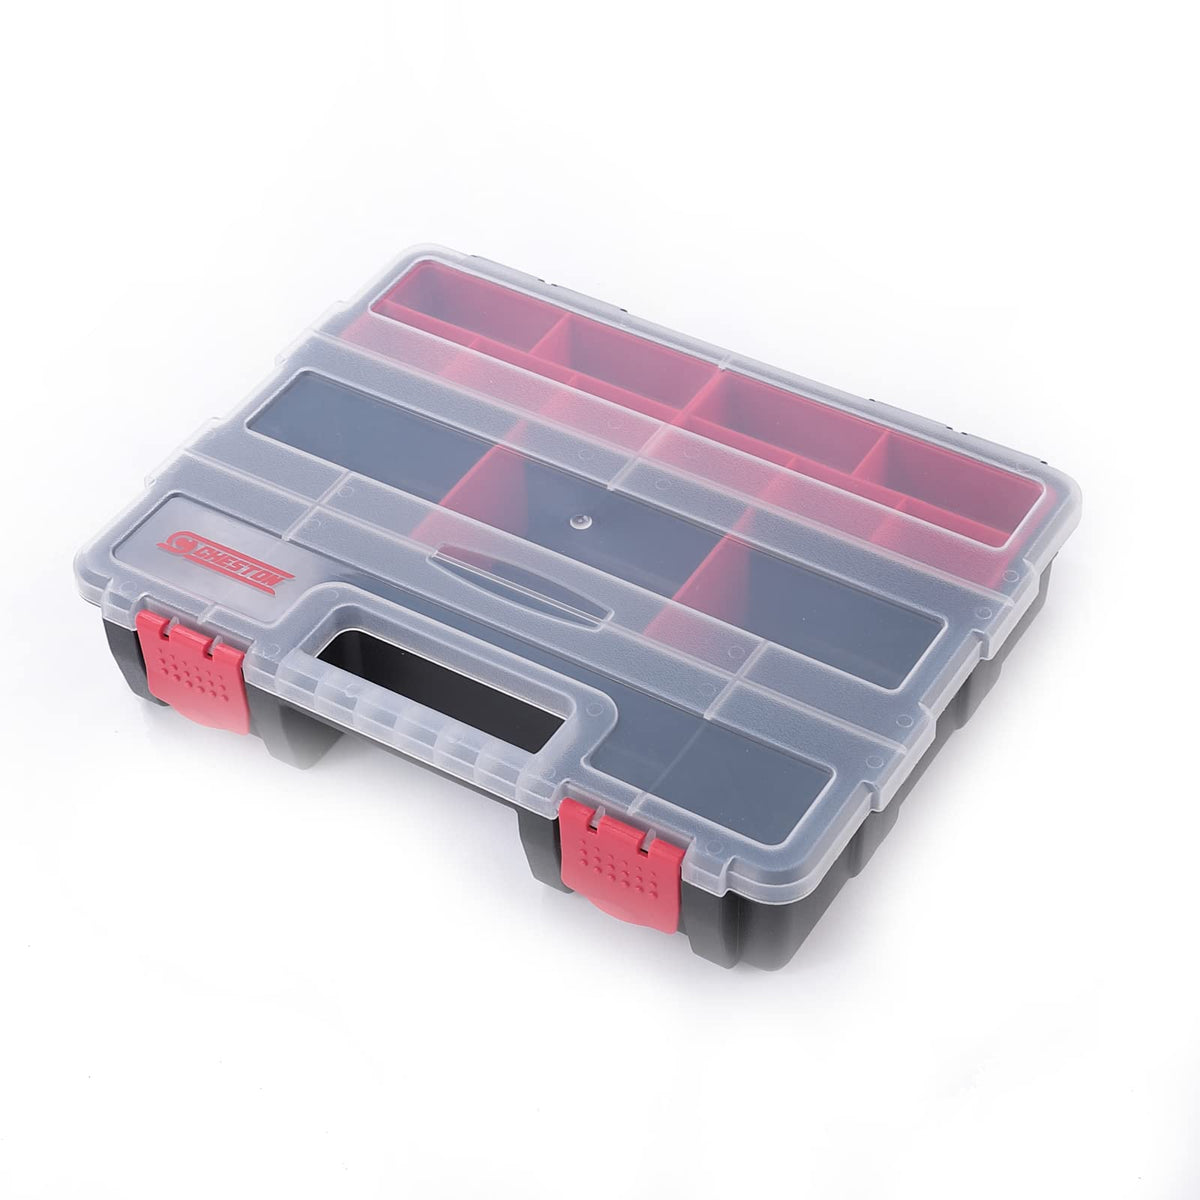 Cheston Tool Organiser Box | Empty Stackable Multi Utility Storage | Durable Plastic | 20 Compartment Box for Wrench Screwdriver Sockets Screw and Small Tools